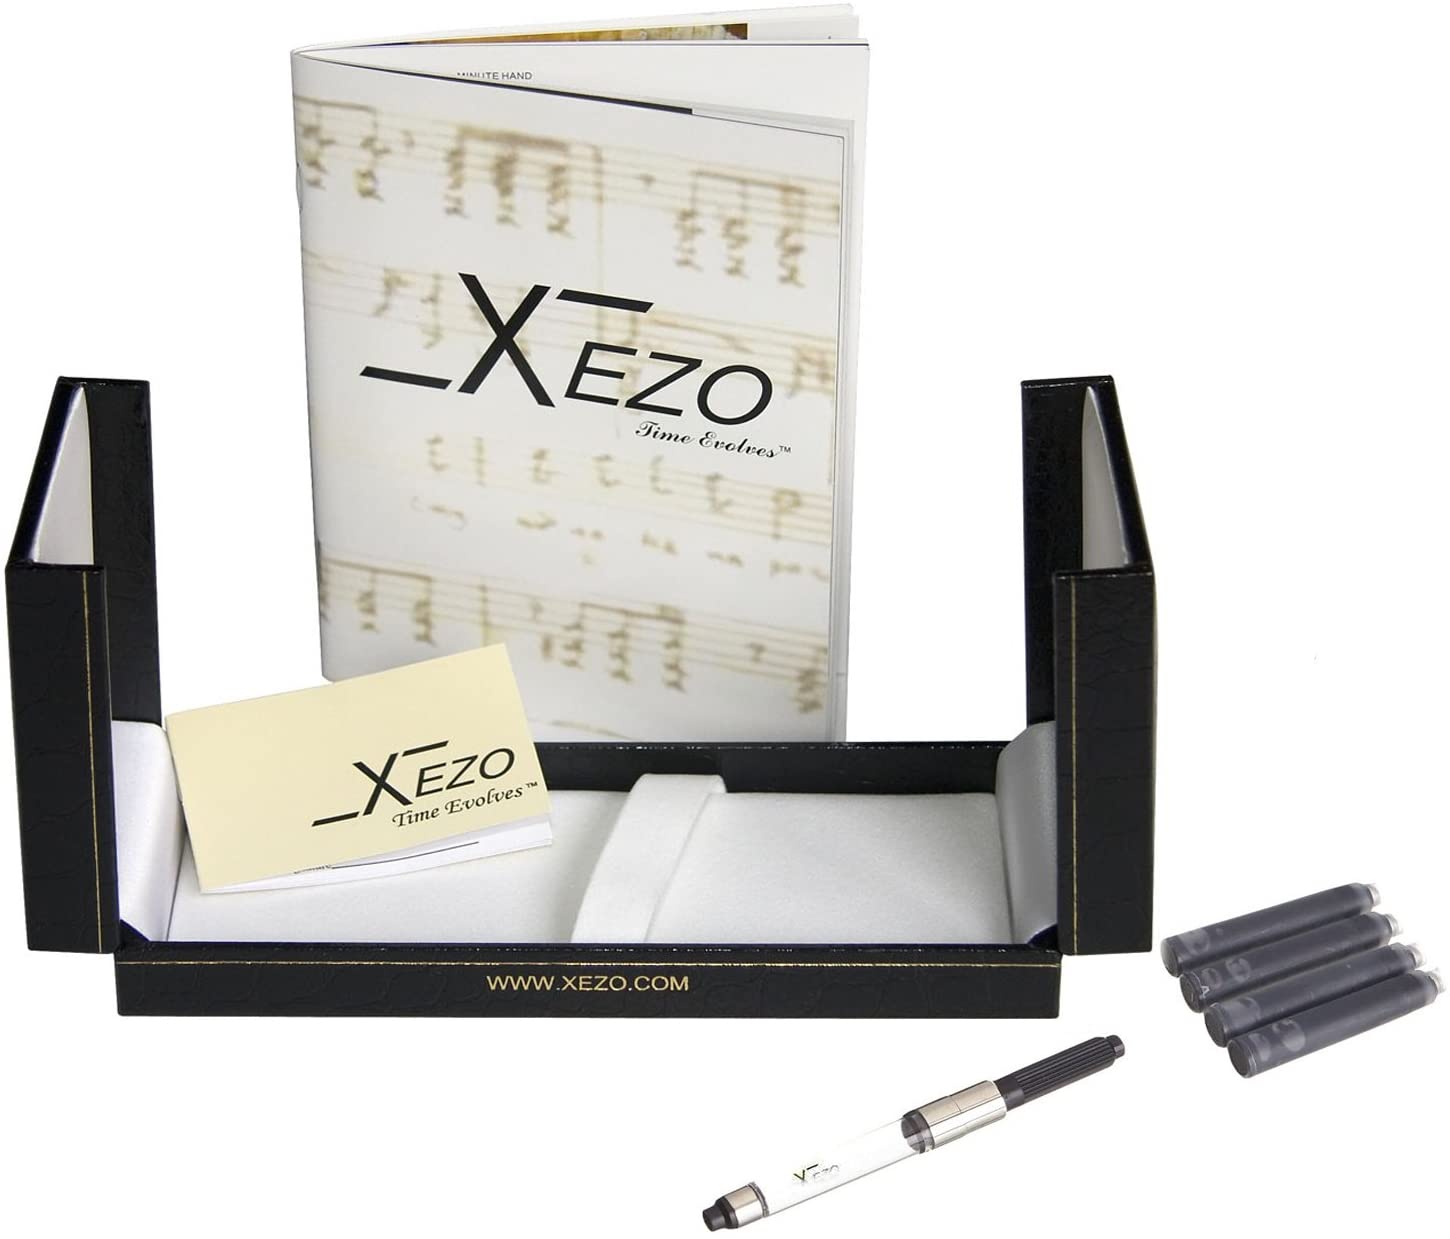 Xezo - Black gift box, certificate, manual, chrome-plated ink converter, and four ink cartridges of the Urbanite II Trek FM fountain pen